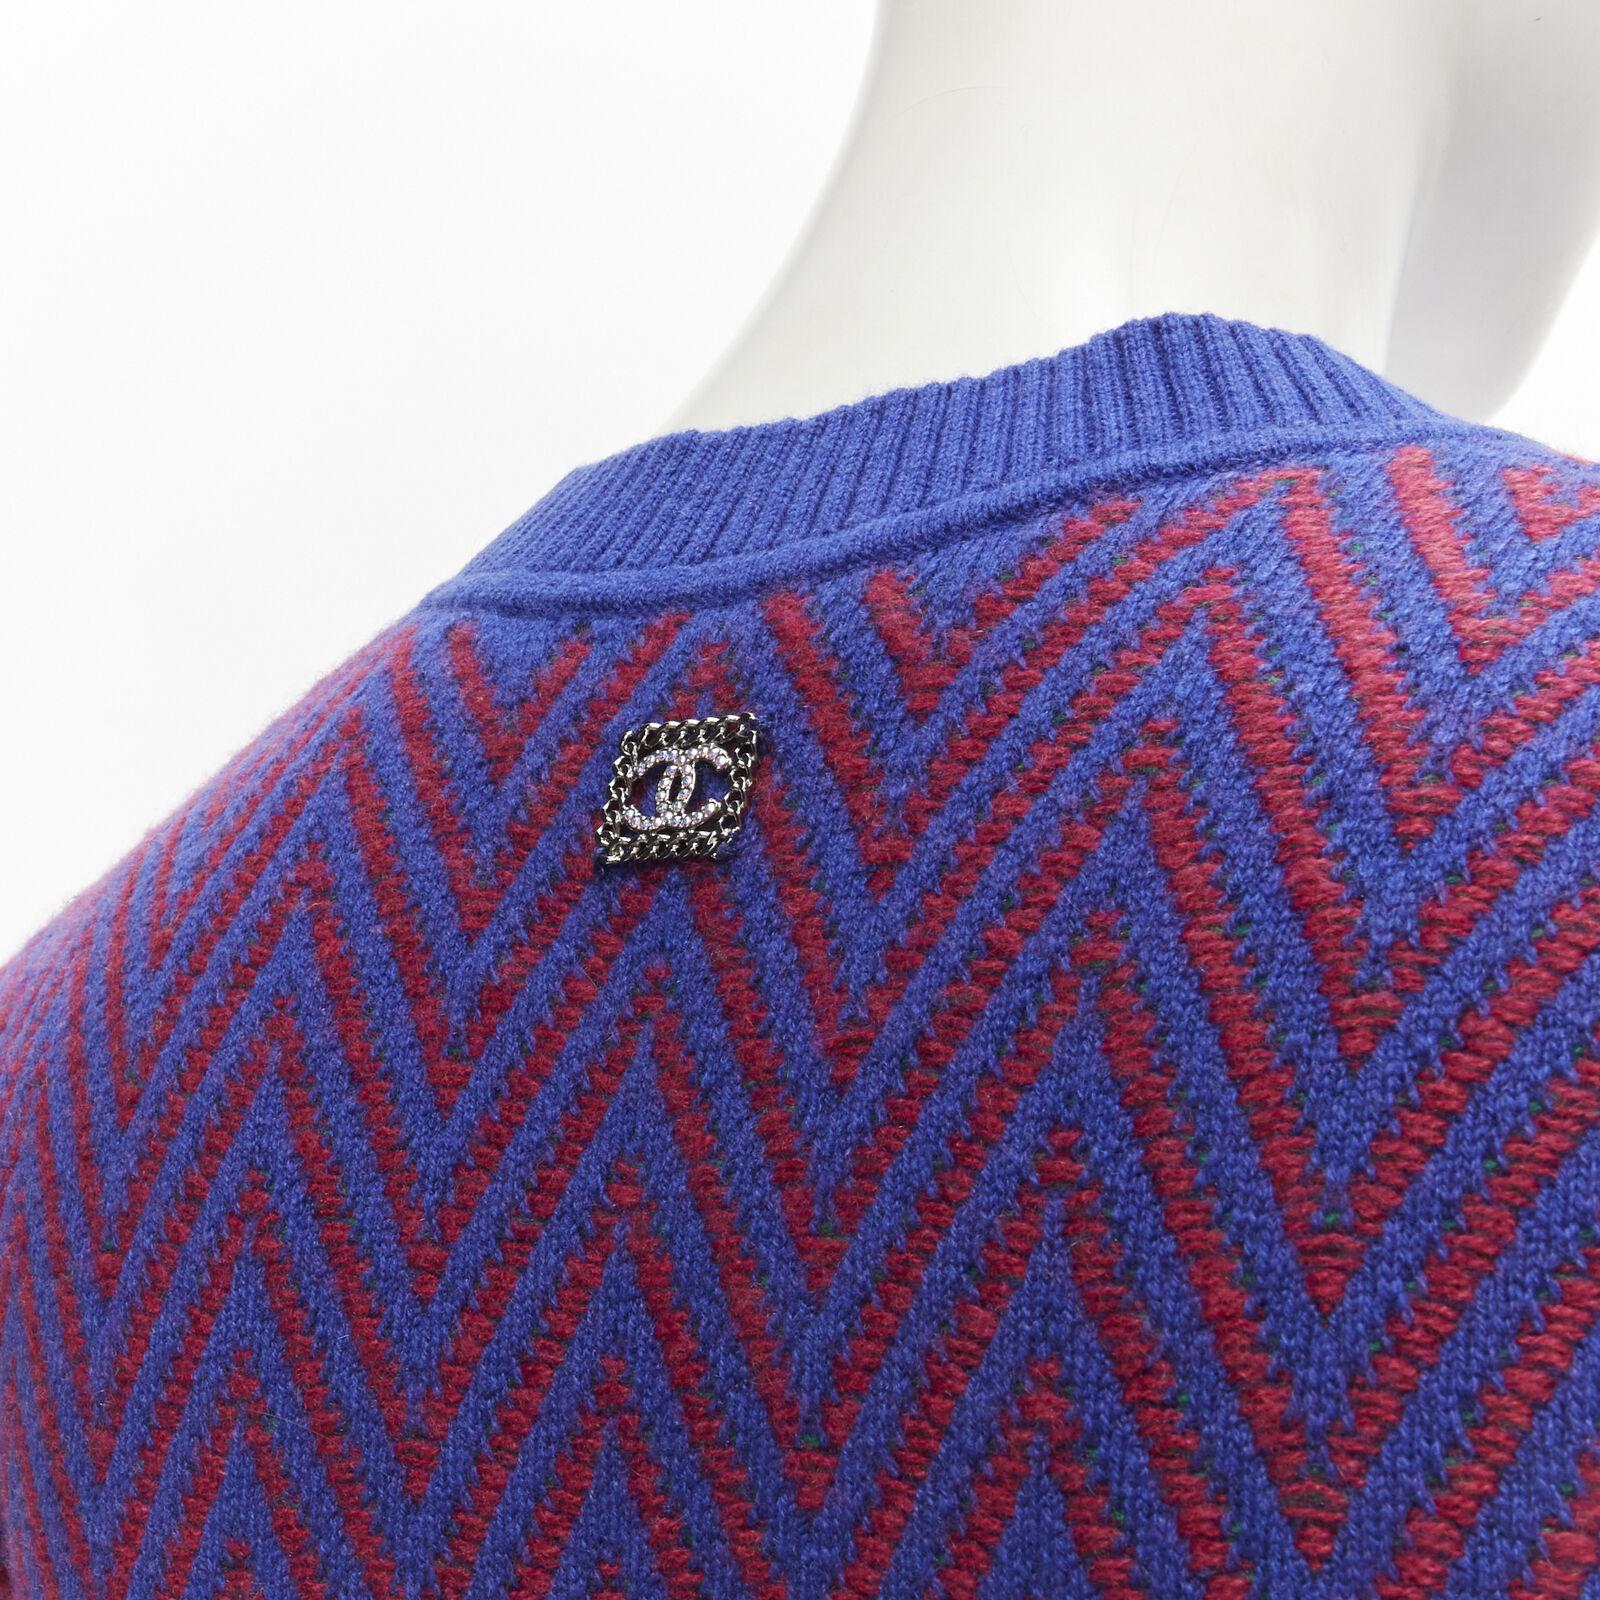 CHANEL 100% cashmere blue red chevron green CC logo crystal brooch dress FR34 XS
Reference: AAWC/A00230
Brand: Chanel
Designer: Virginie Viard
Material: Cashmere, Elastane
Color: Blue, Red
Pattern: Chevron
Lining: Unlined
Extra Details: Green Chanel